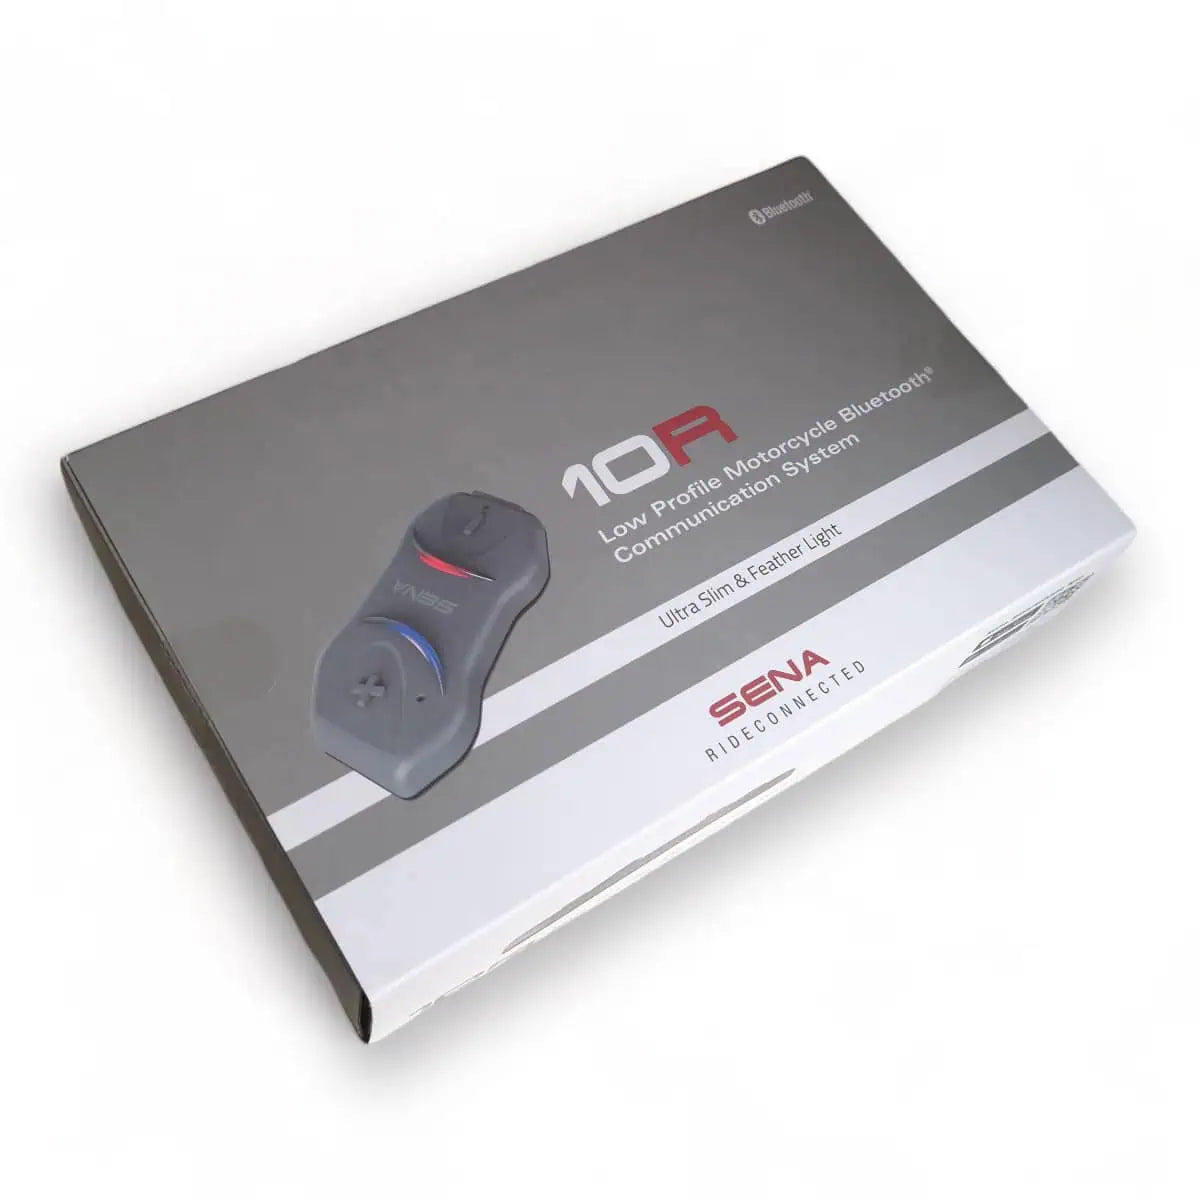 The Sena 10R Bluetooth Headset: Sena's low profile best-seller with traditional button controls